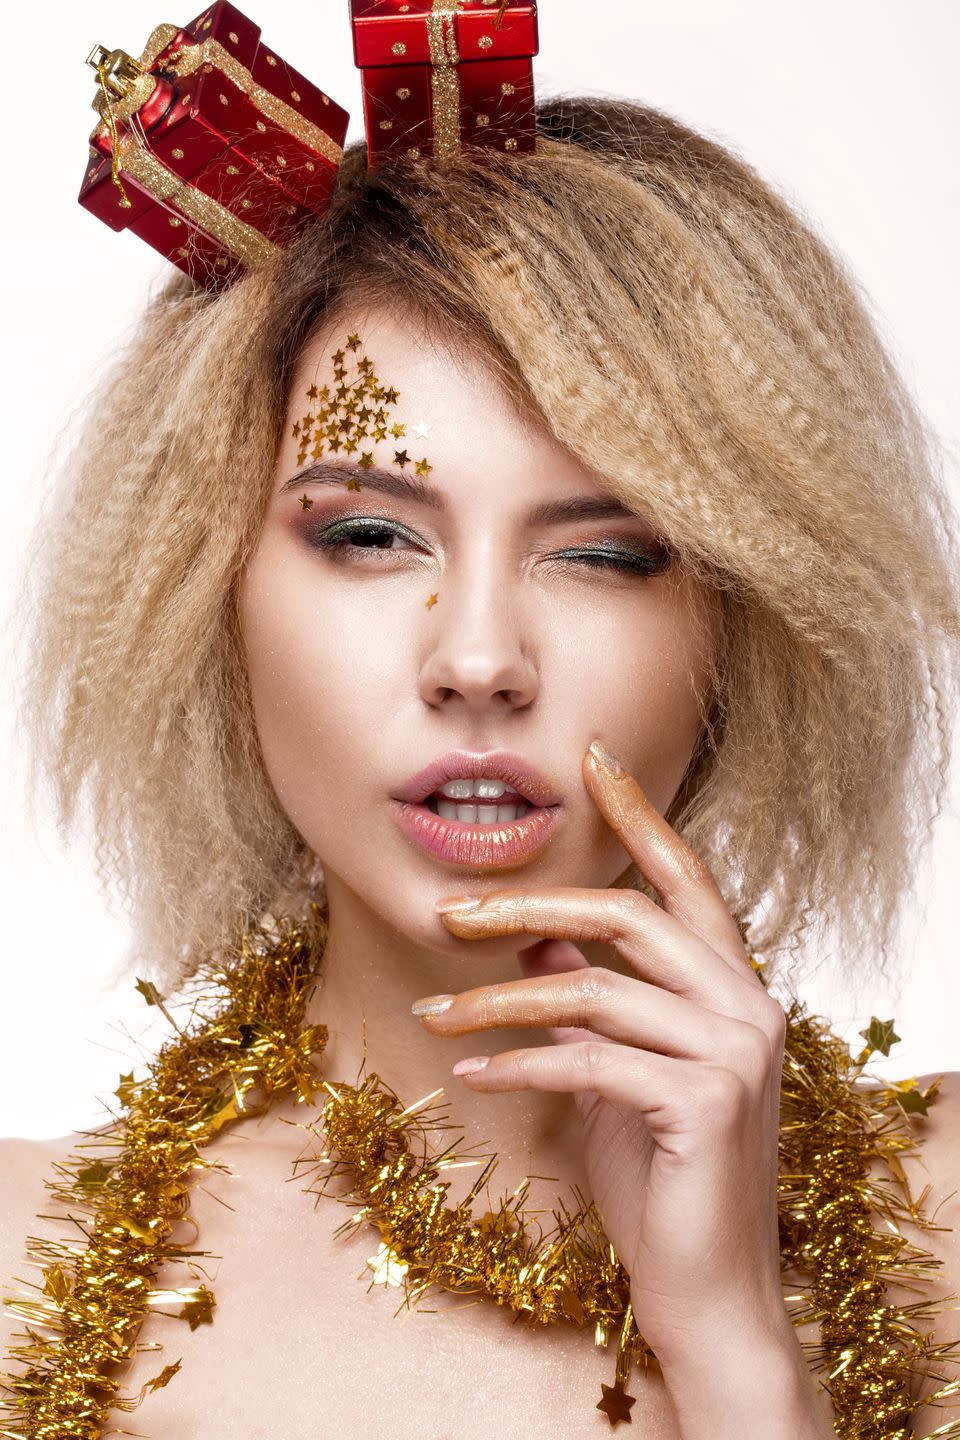 woman with crimped blonde hair winking at camera with gold stars above one eyebrow and two red and gold wrapped christmas presents on an angle on her head with gold tinsel around her neck